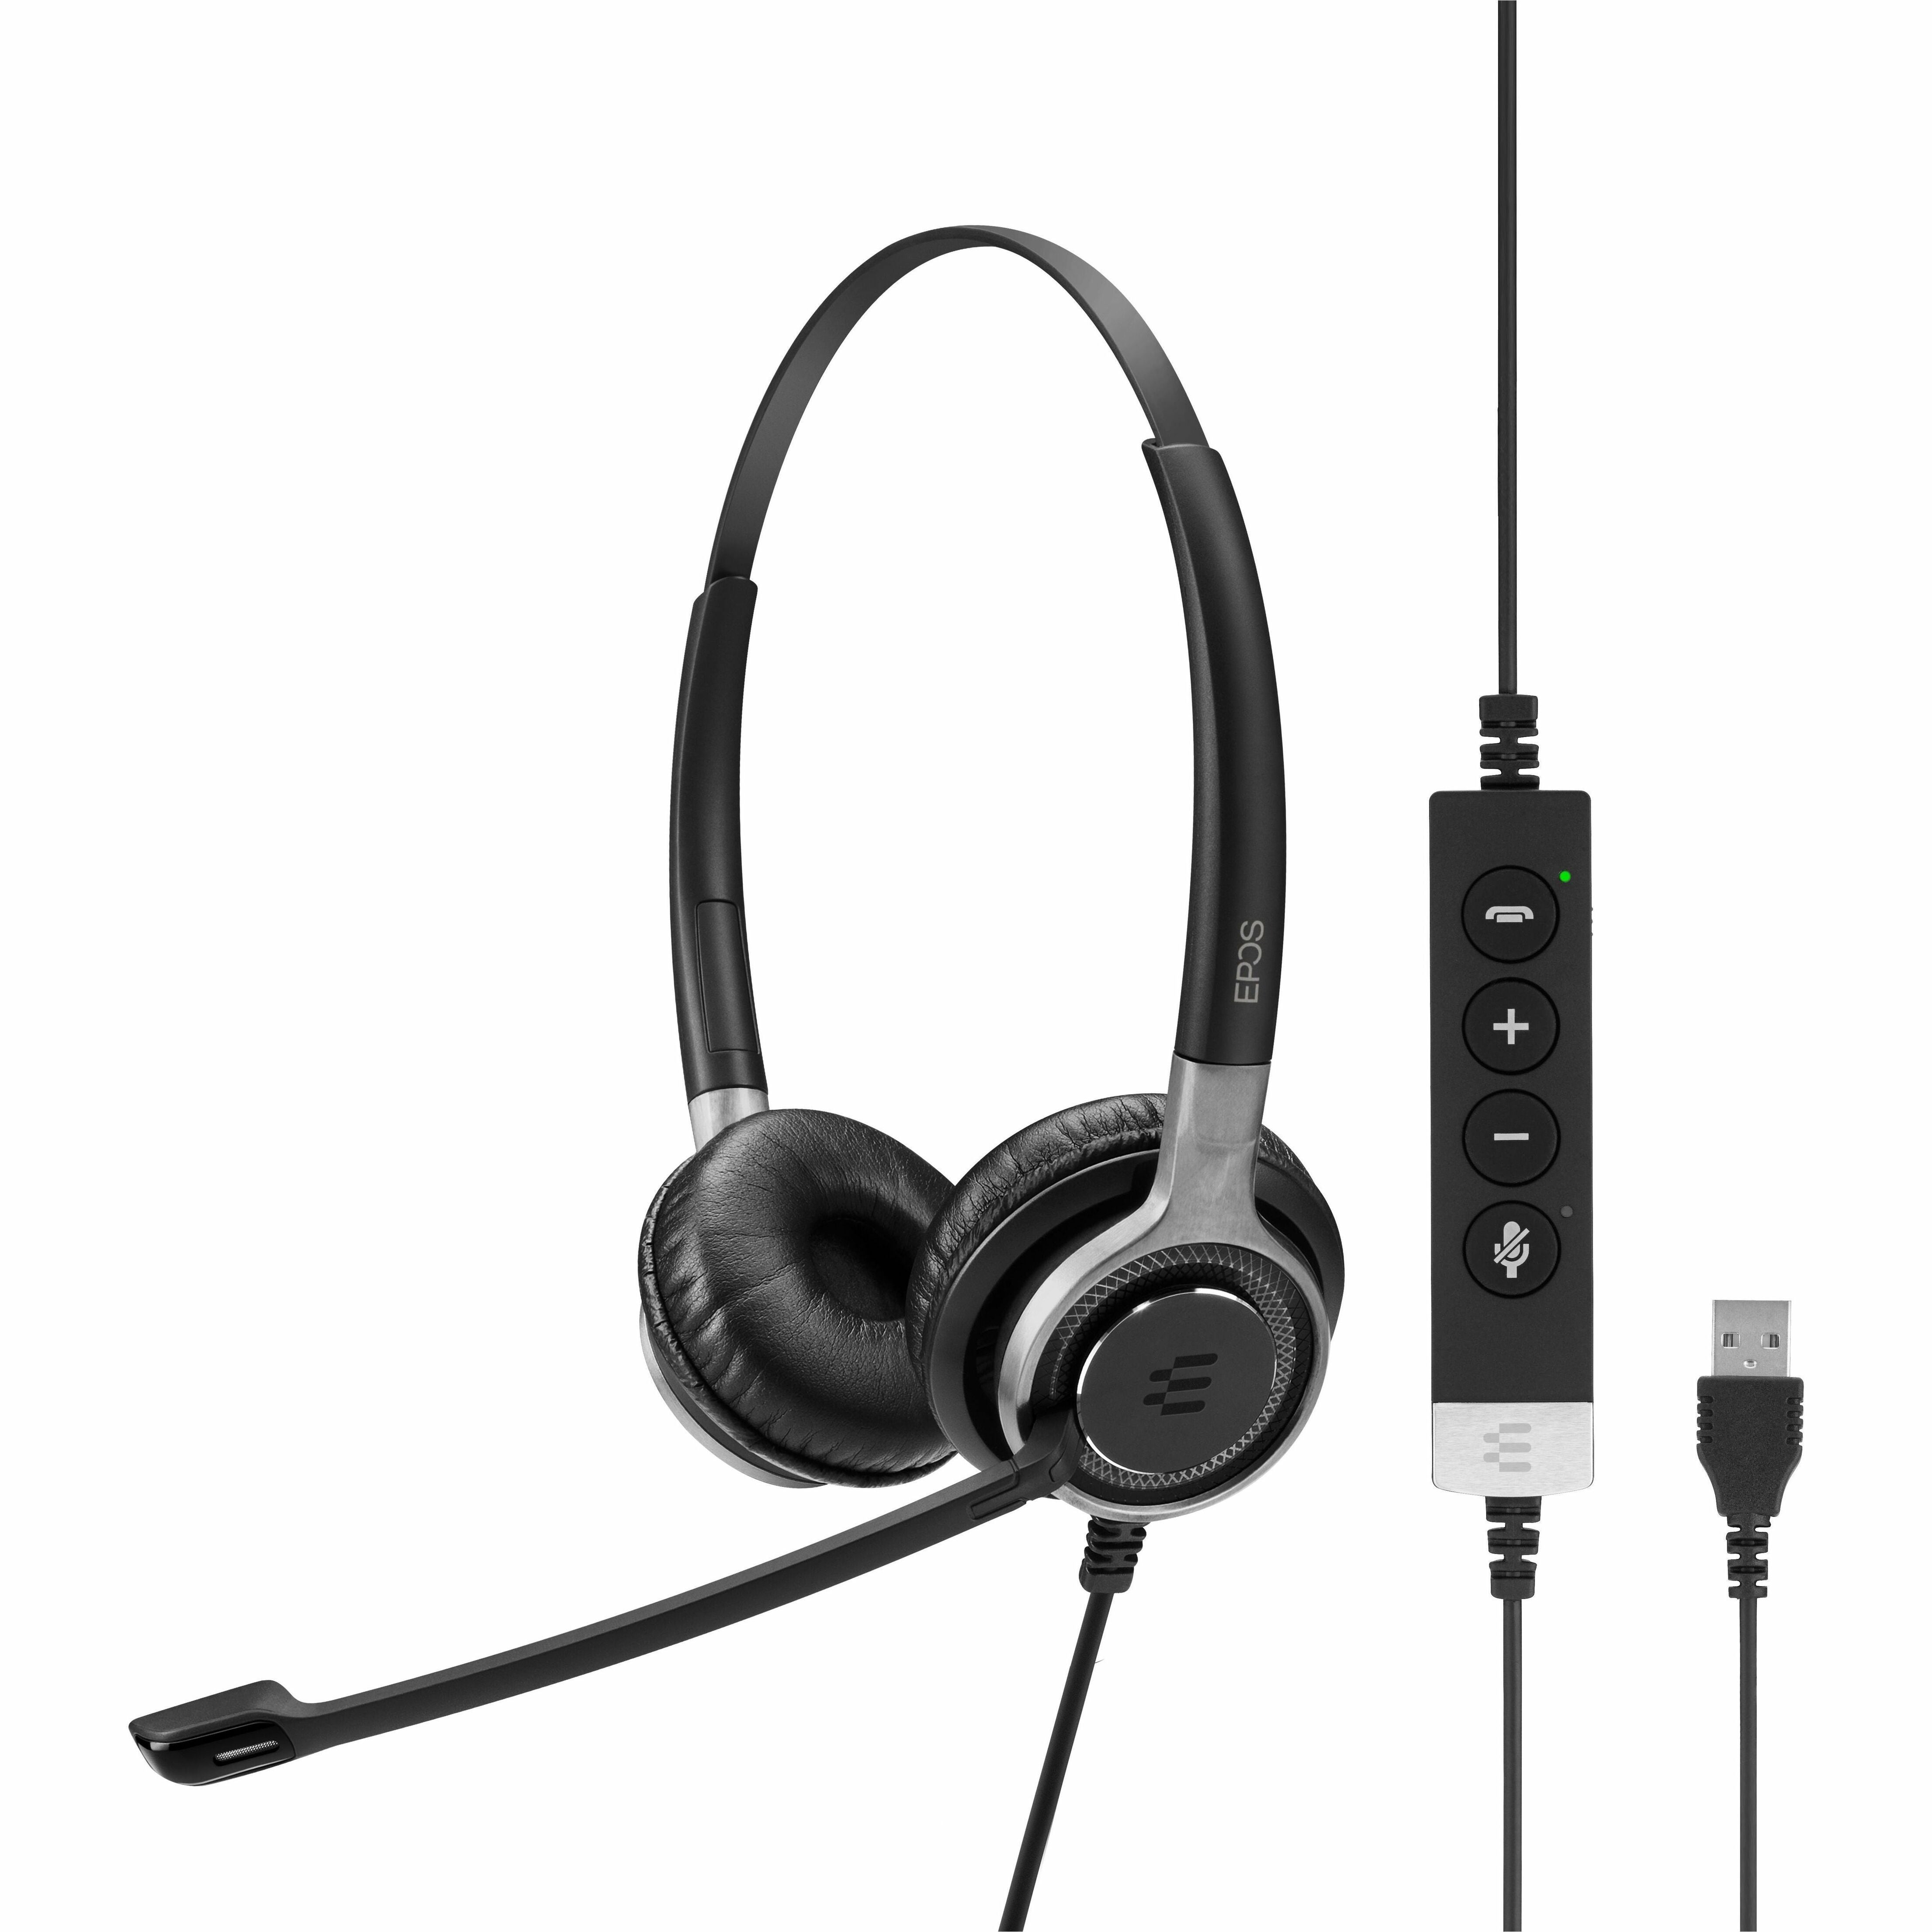 EPOS | SENNHEISER 1000650 IMPACT SC 660 ANC USB Headset Stereo Wired Noise Cancelling Microphone Black Silver